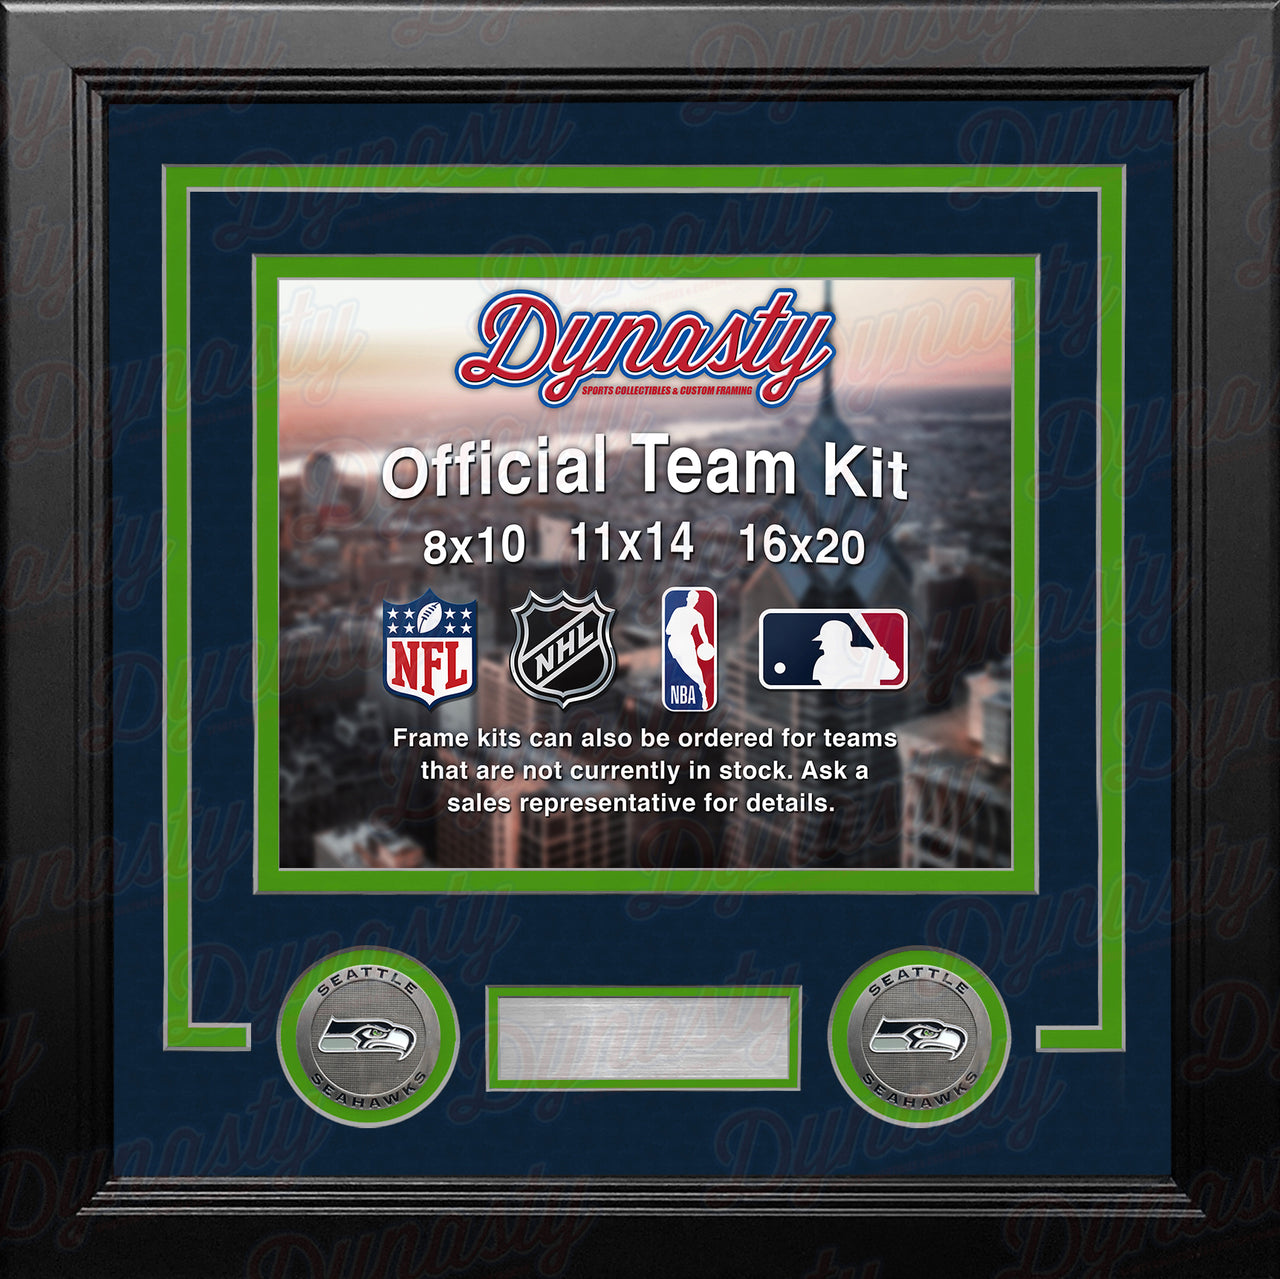 NFL Football Photo Picture Frame Kit - Seattle Seahawks (Navy Matting, Lime Trim) - Dynasty Sports & Framing 